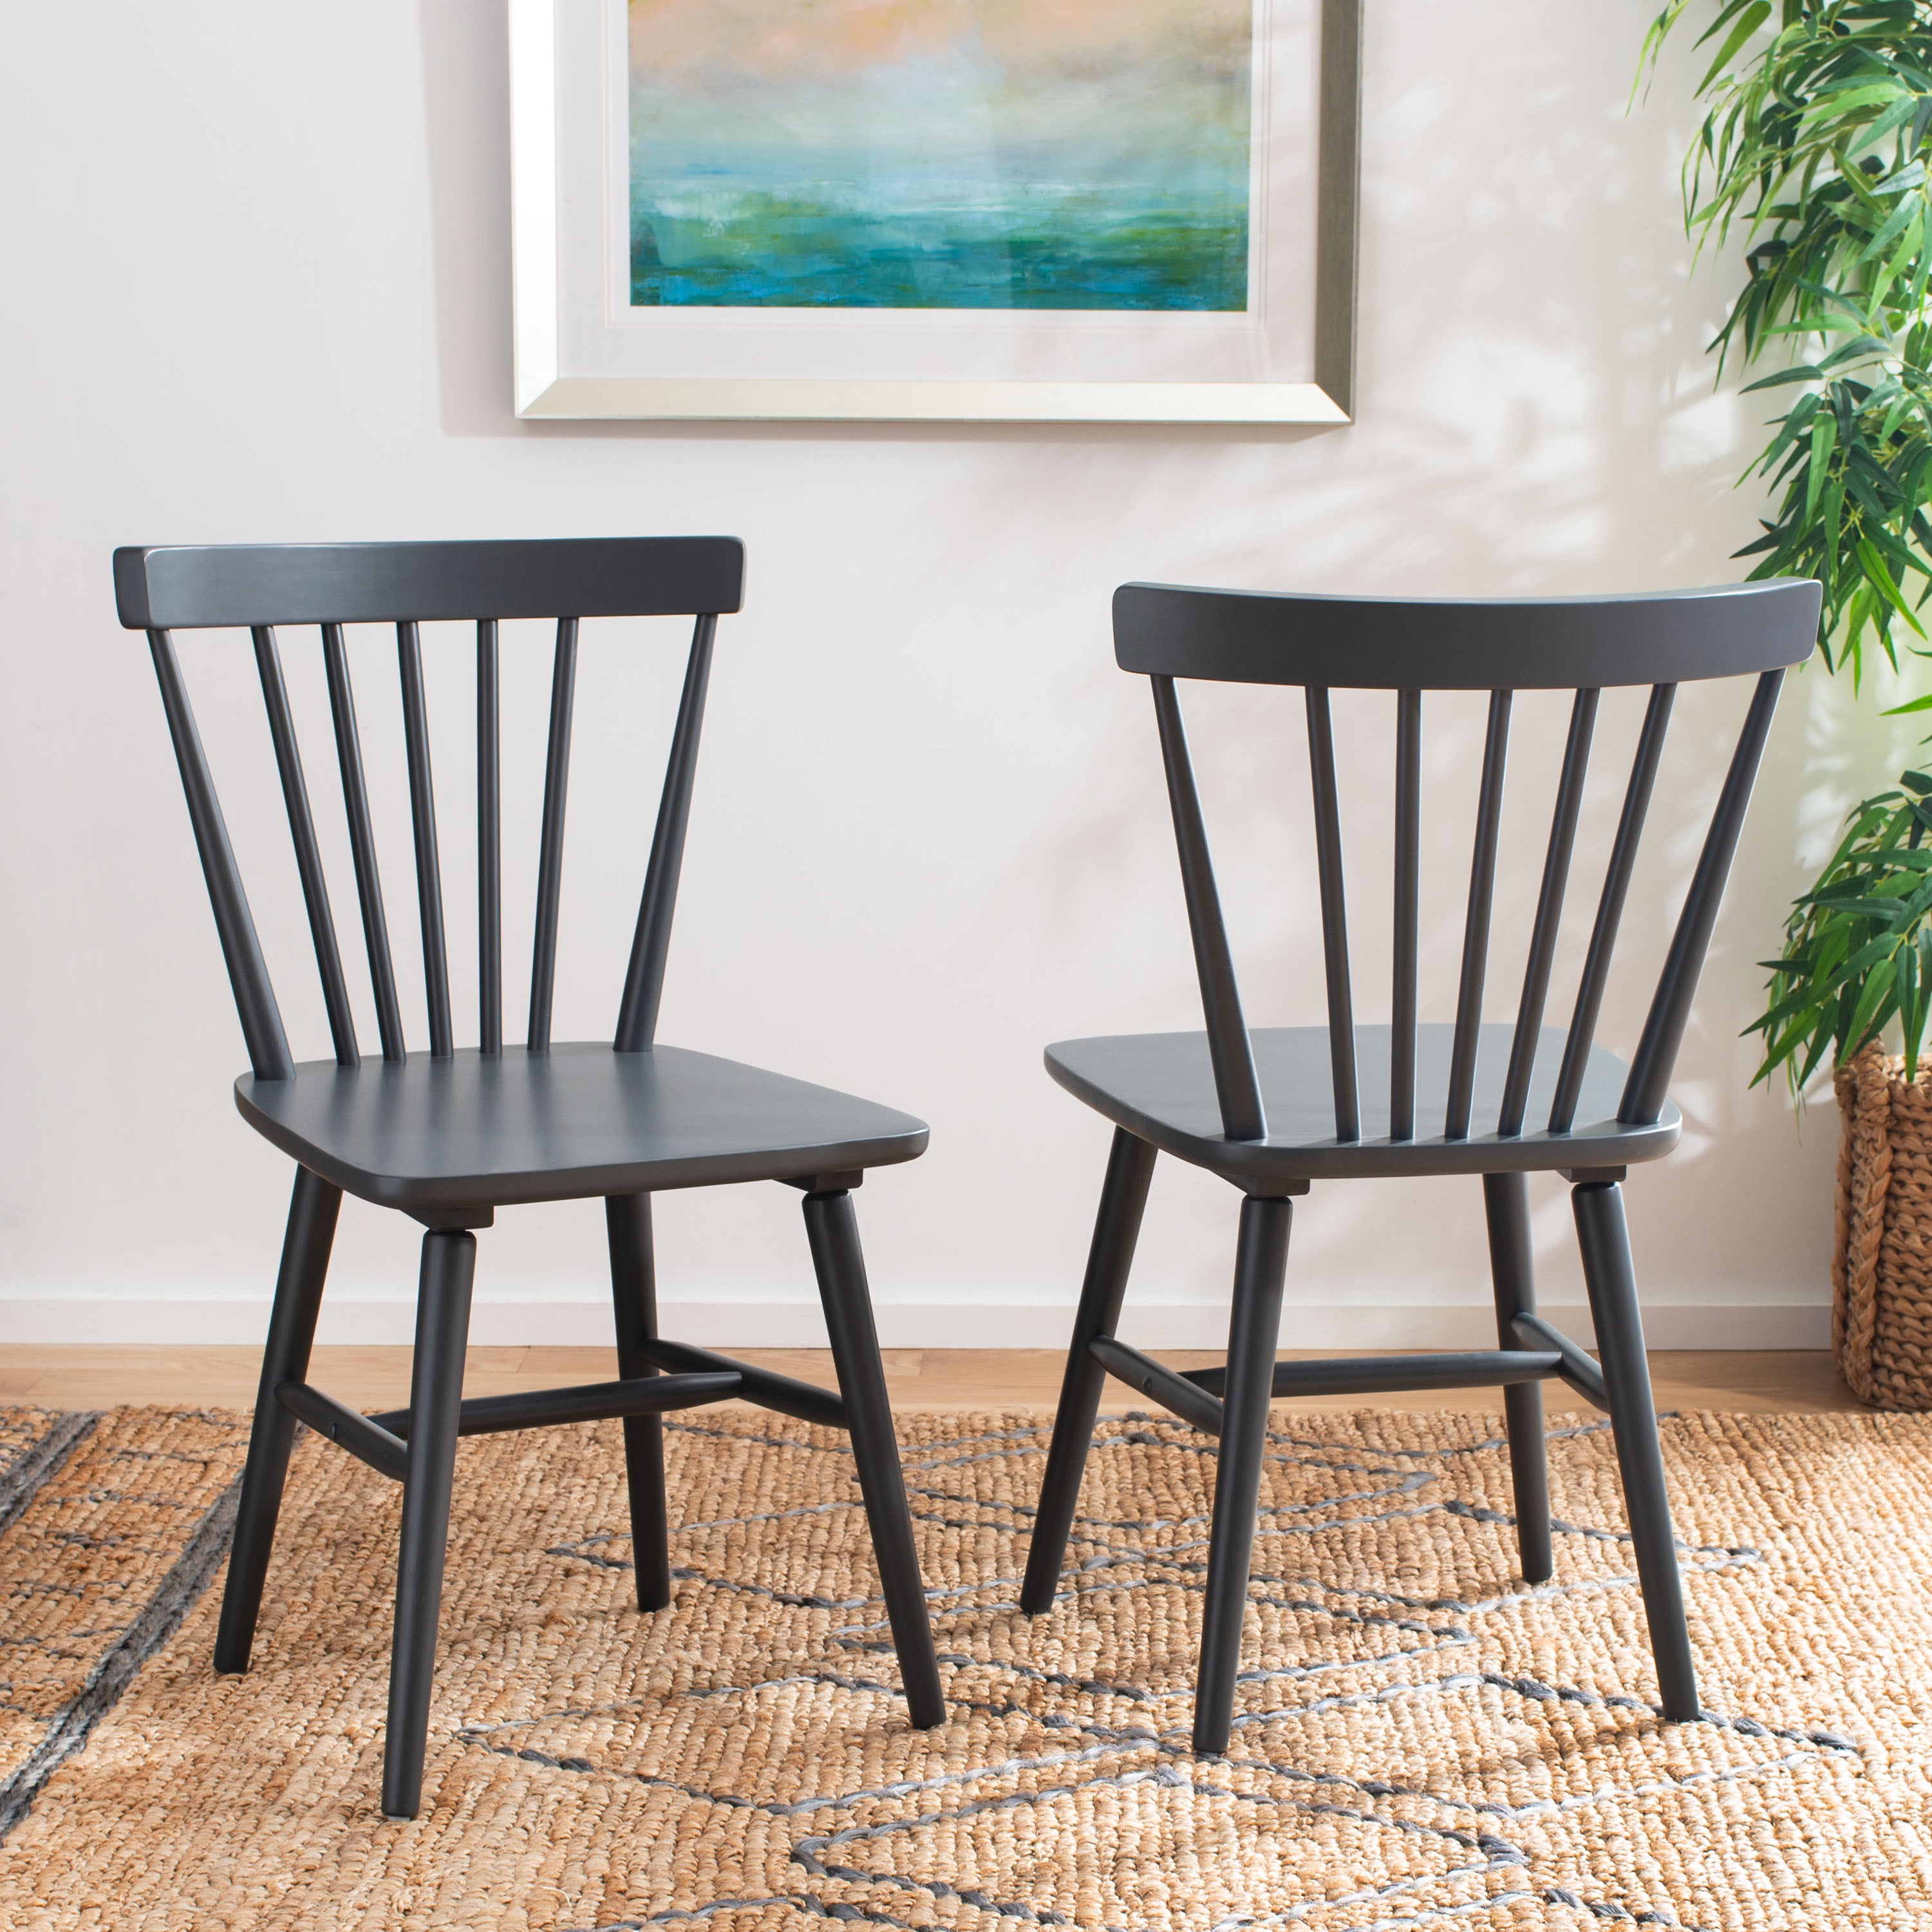 Safavieh Winona Spindle Back Dining Chair, Set of 2, Grey